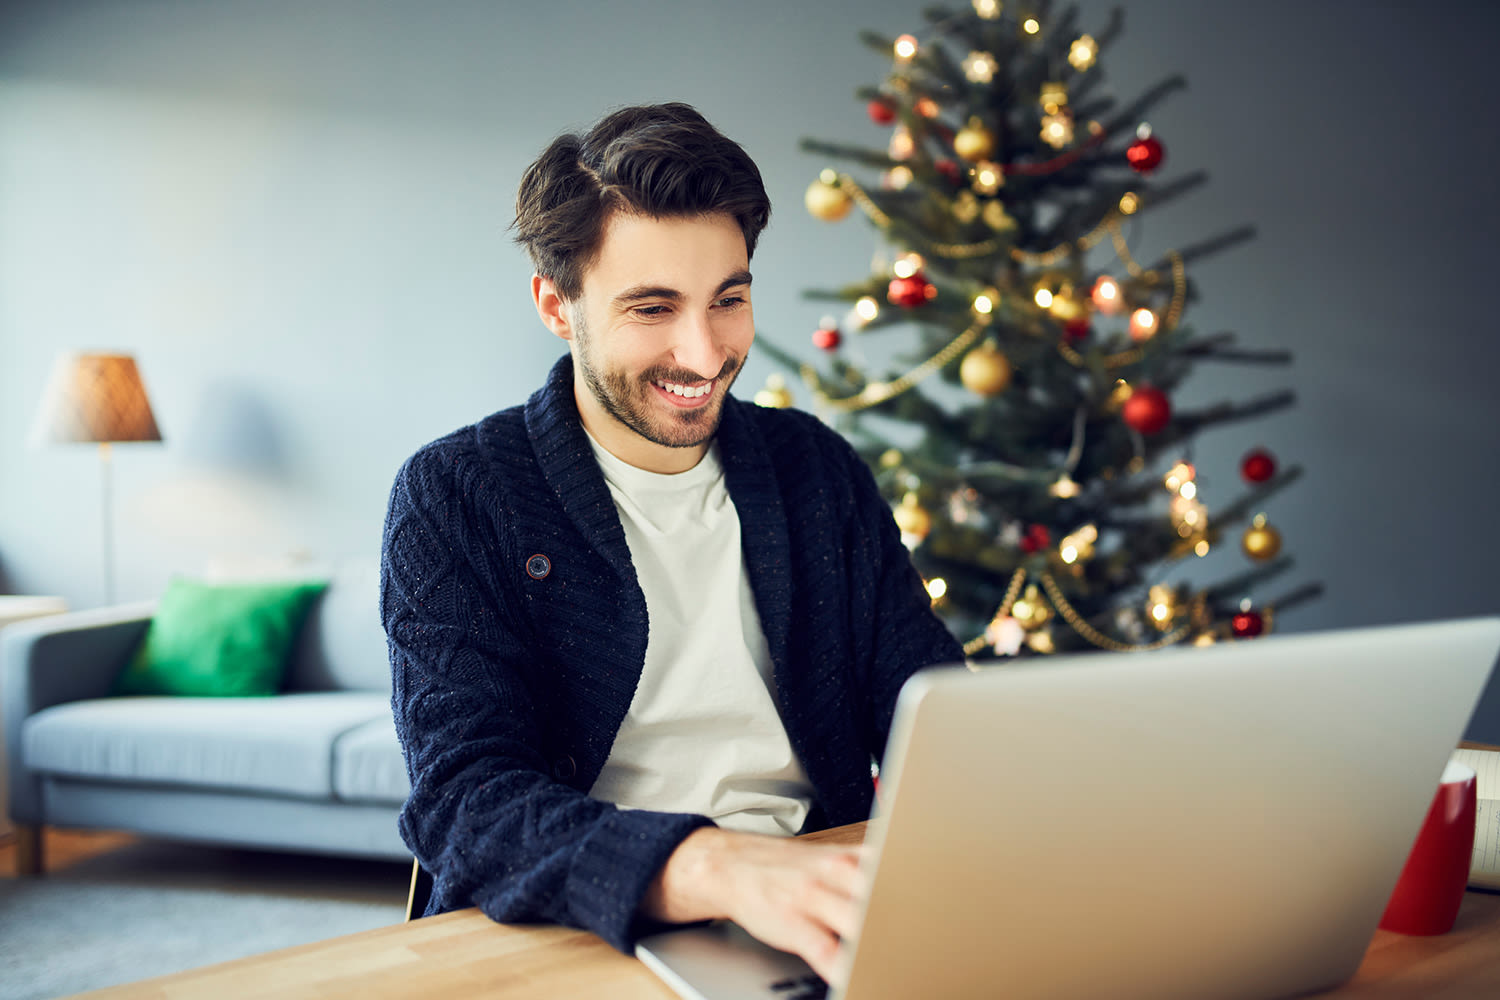 A man using his laptop sitting at a table. A Christmas tree in the background.